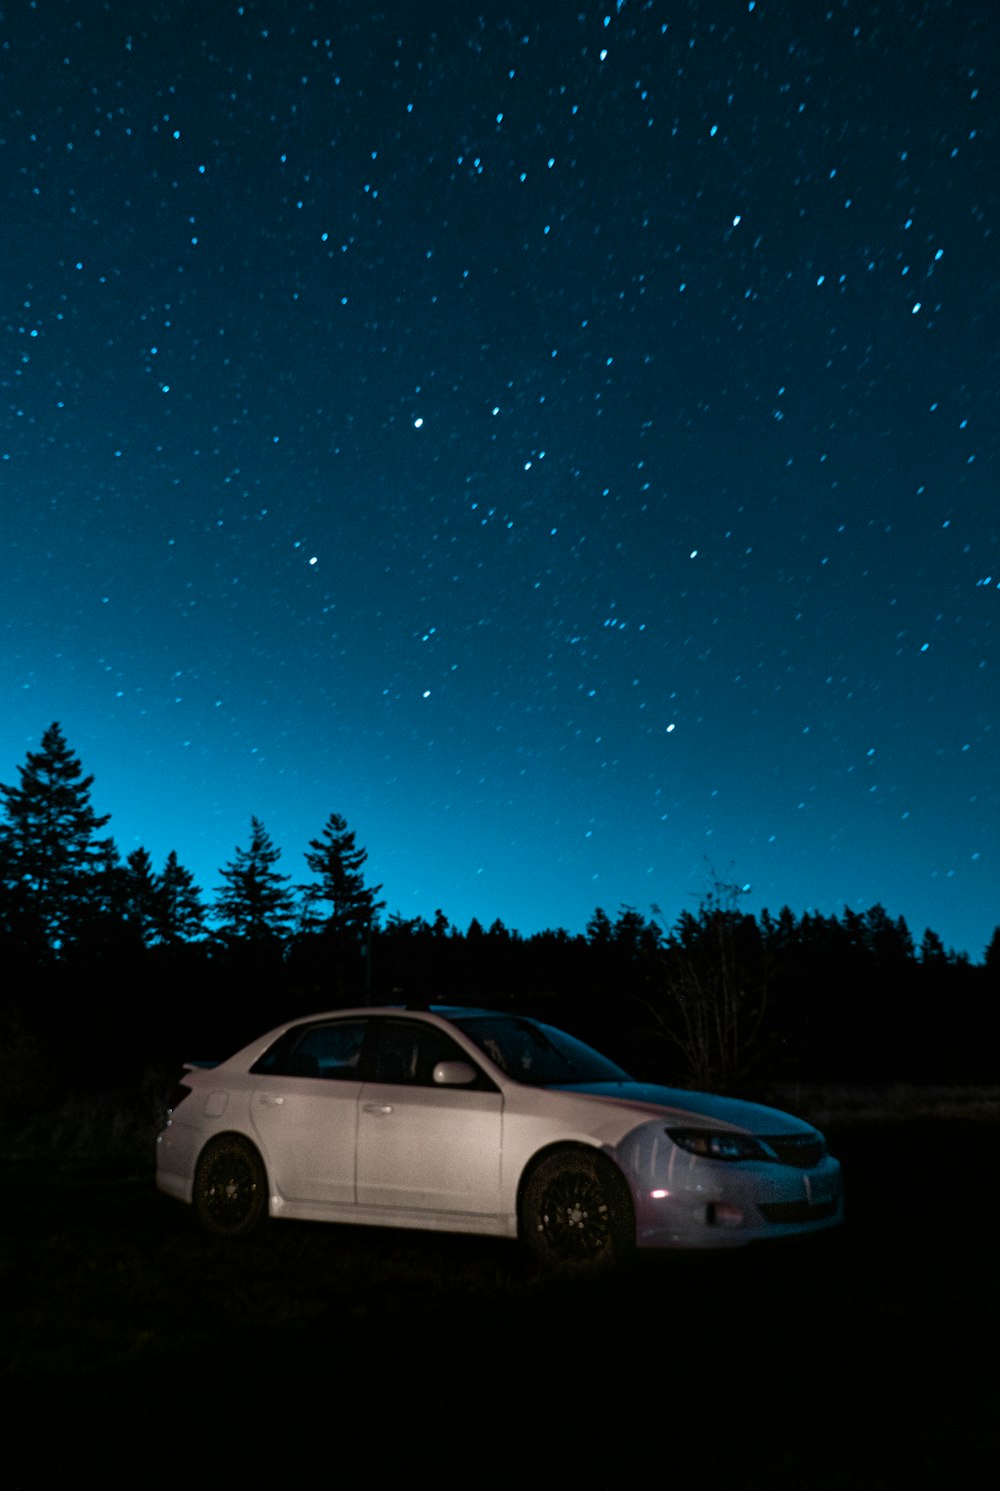 a car parked in a field at night under the stars